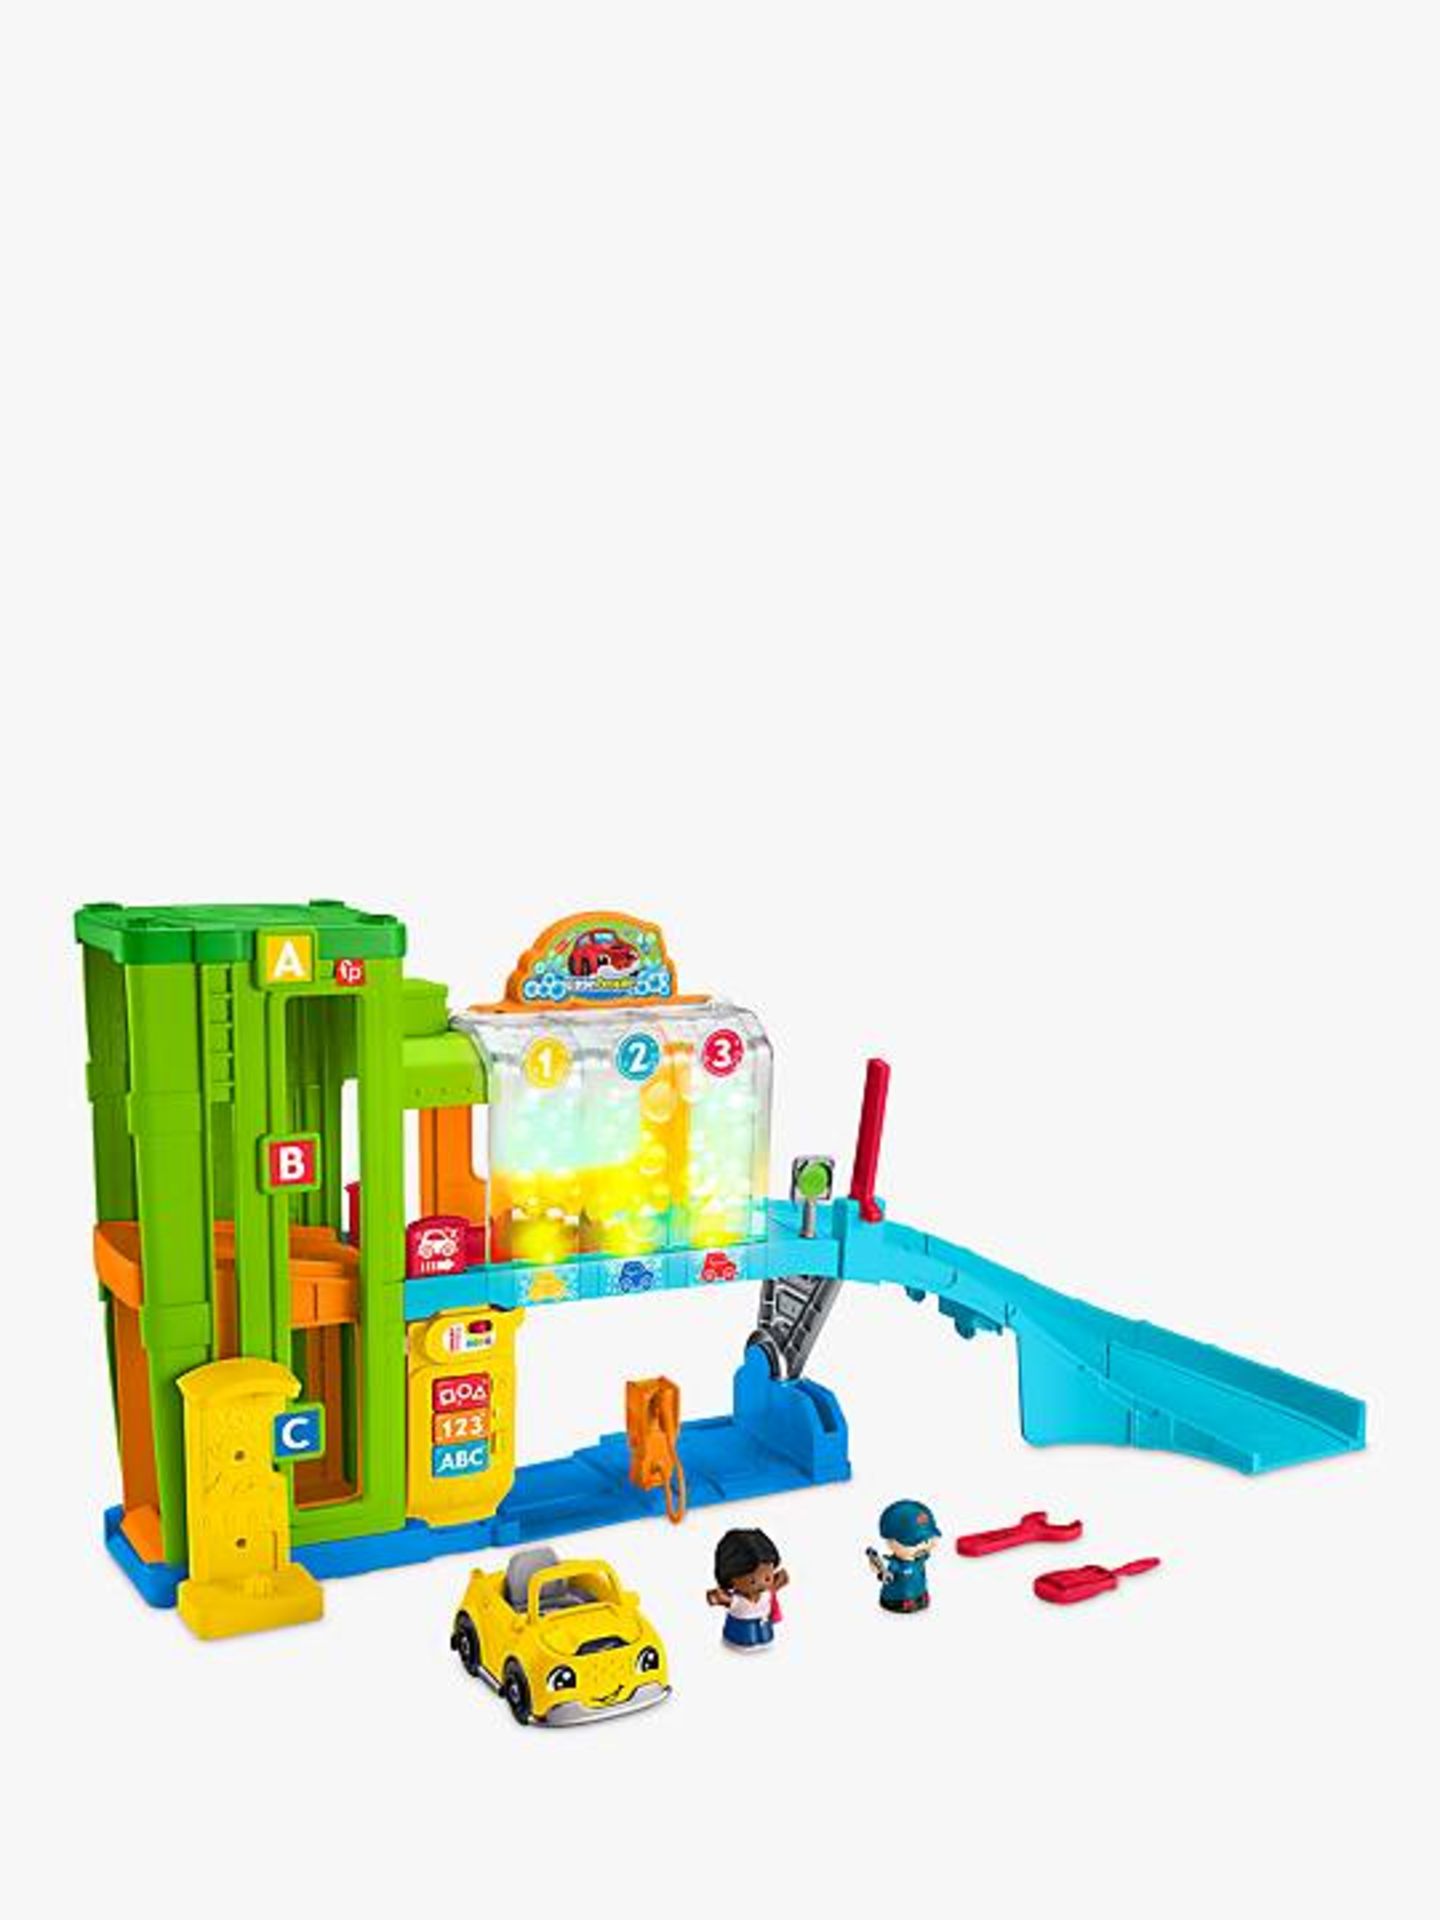 Pallet of Raw Customer Returns - Category - TOYS - P100168669 - Image 24 of 26